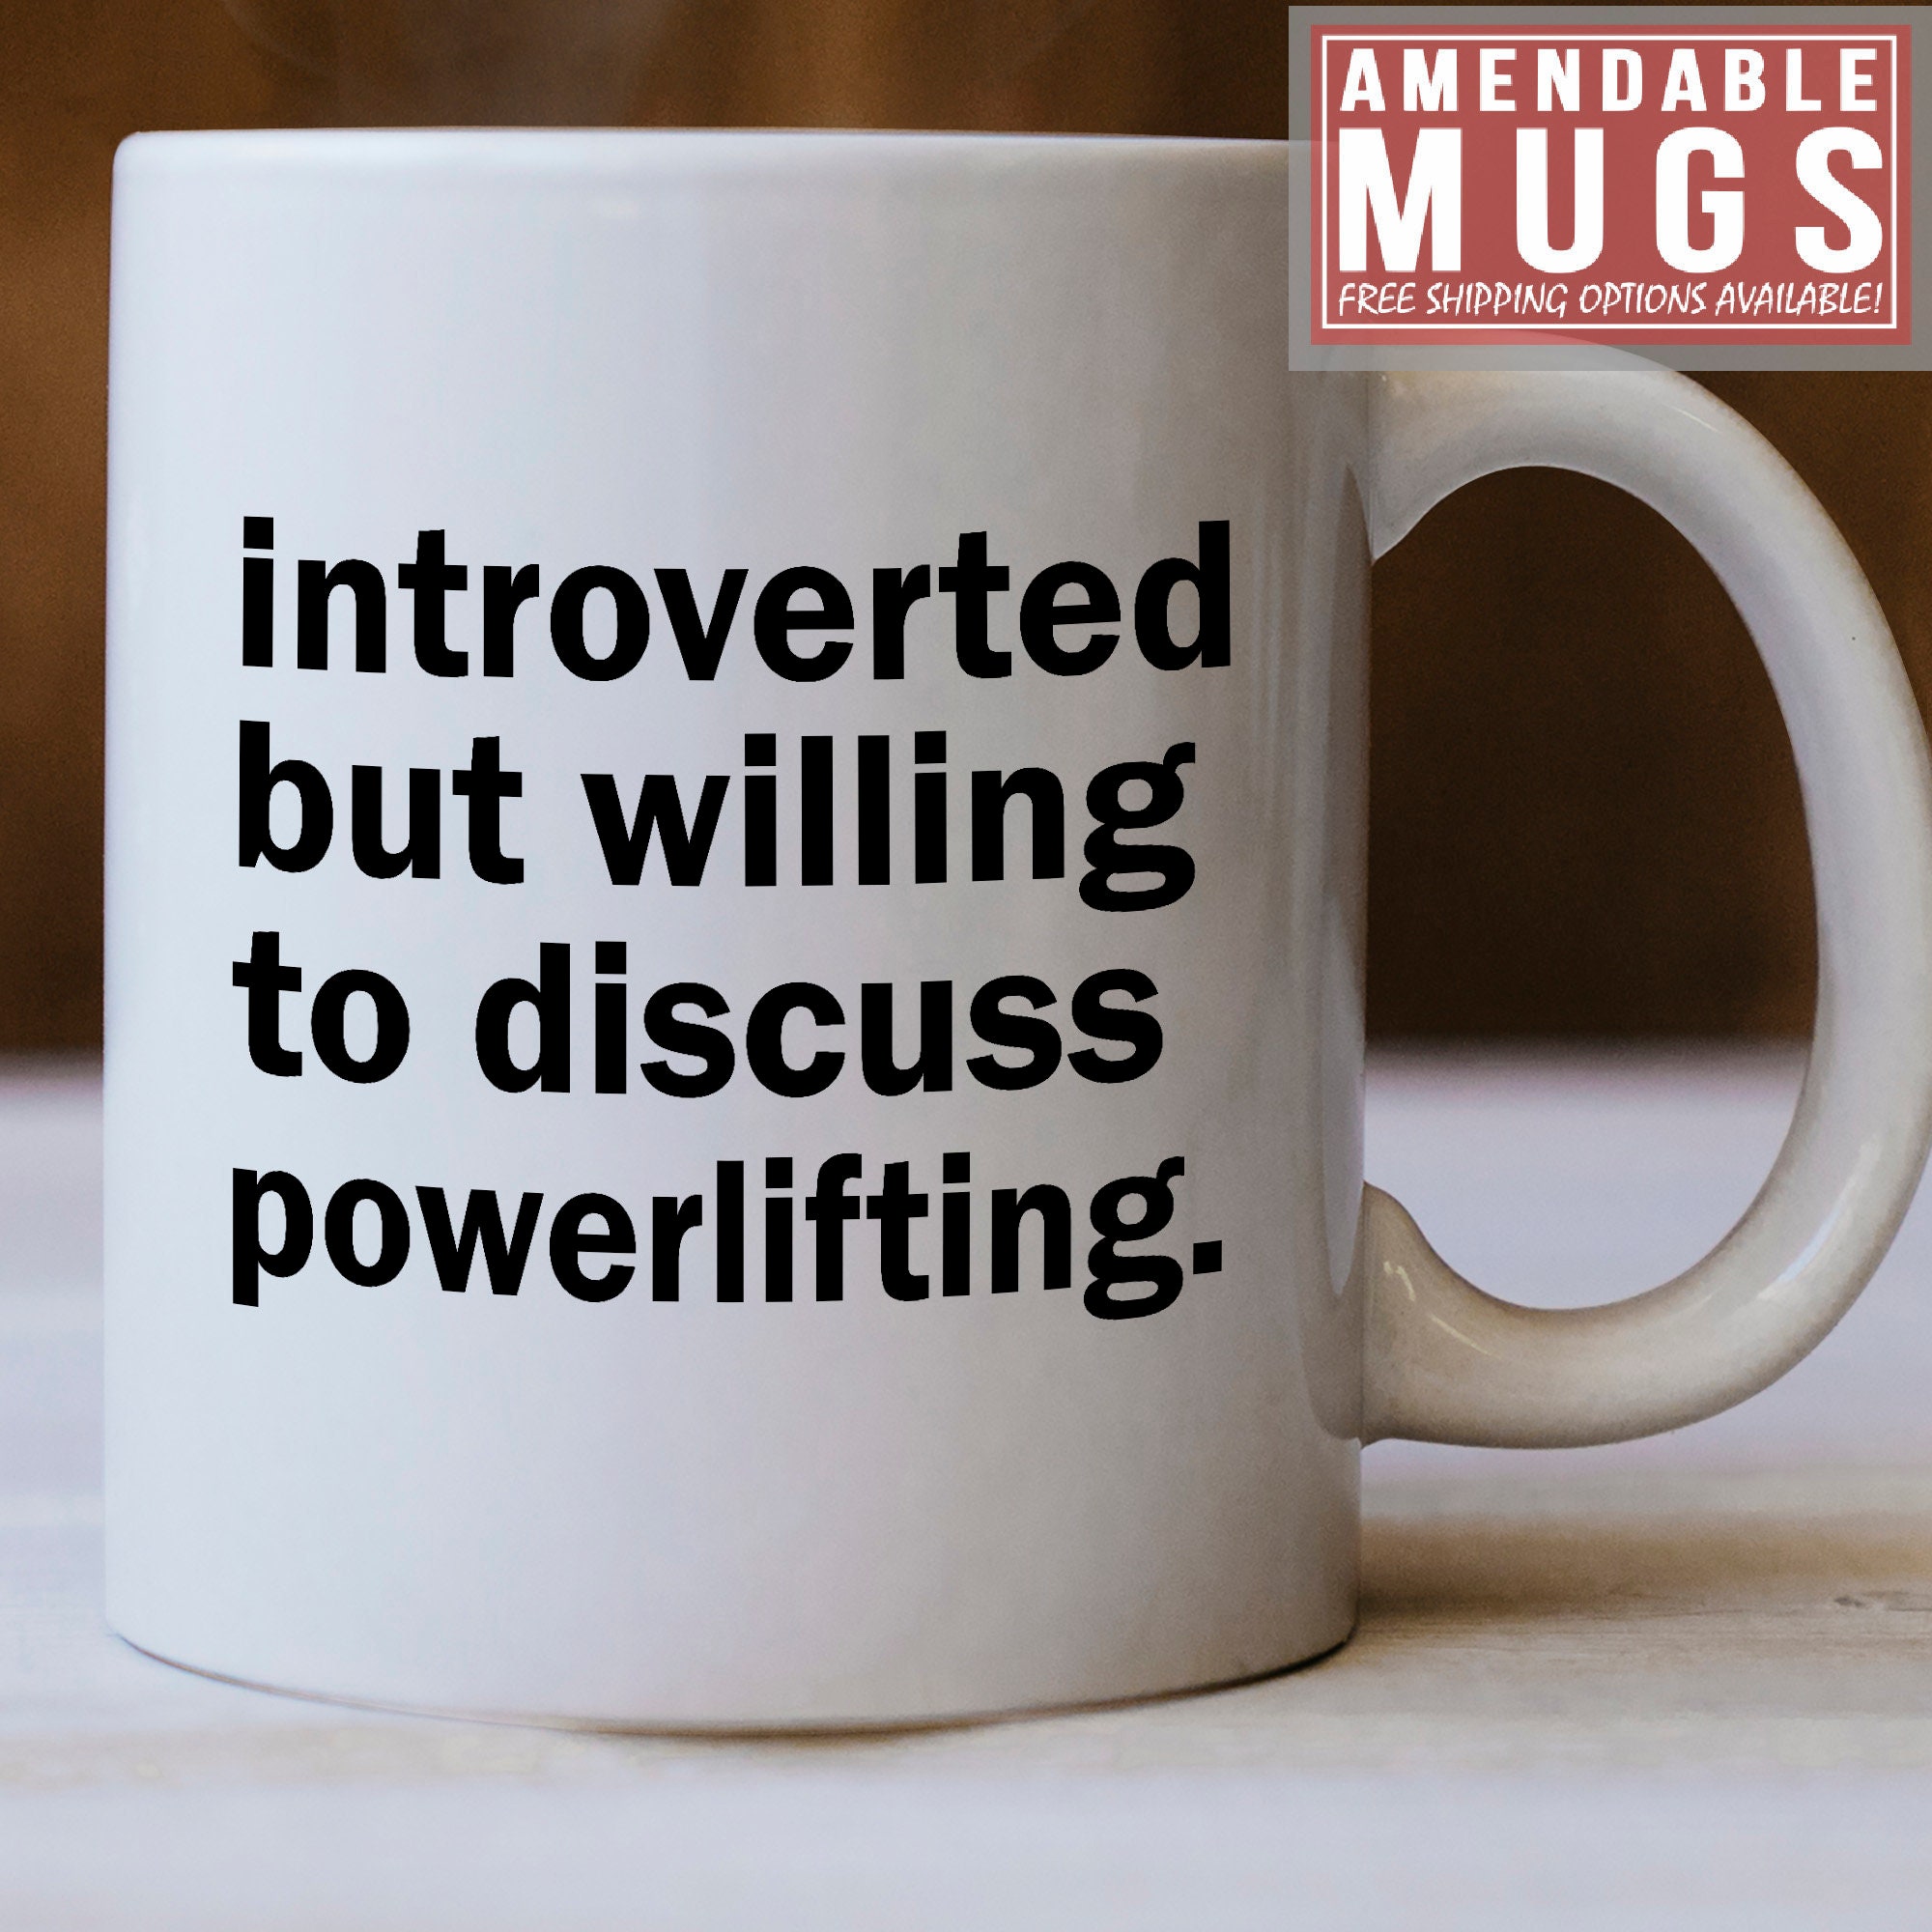 Funny Powerlifting Gift - Today's Schedule Coffee Powerlifting Happy Hour -  12x1